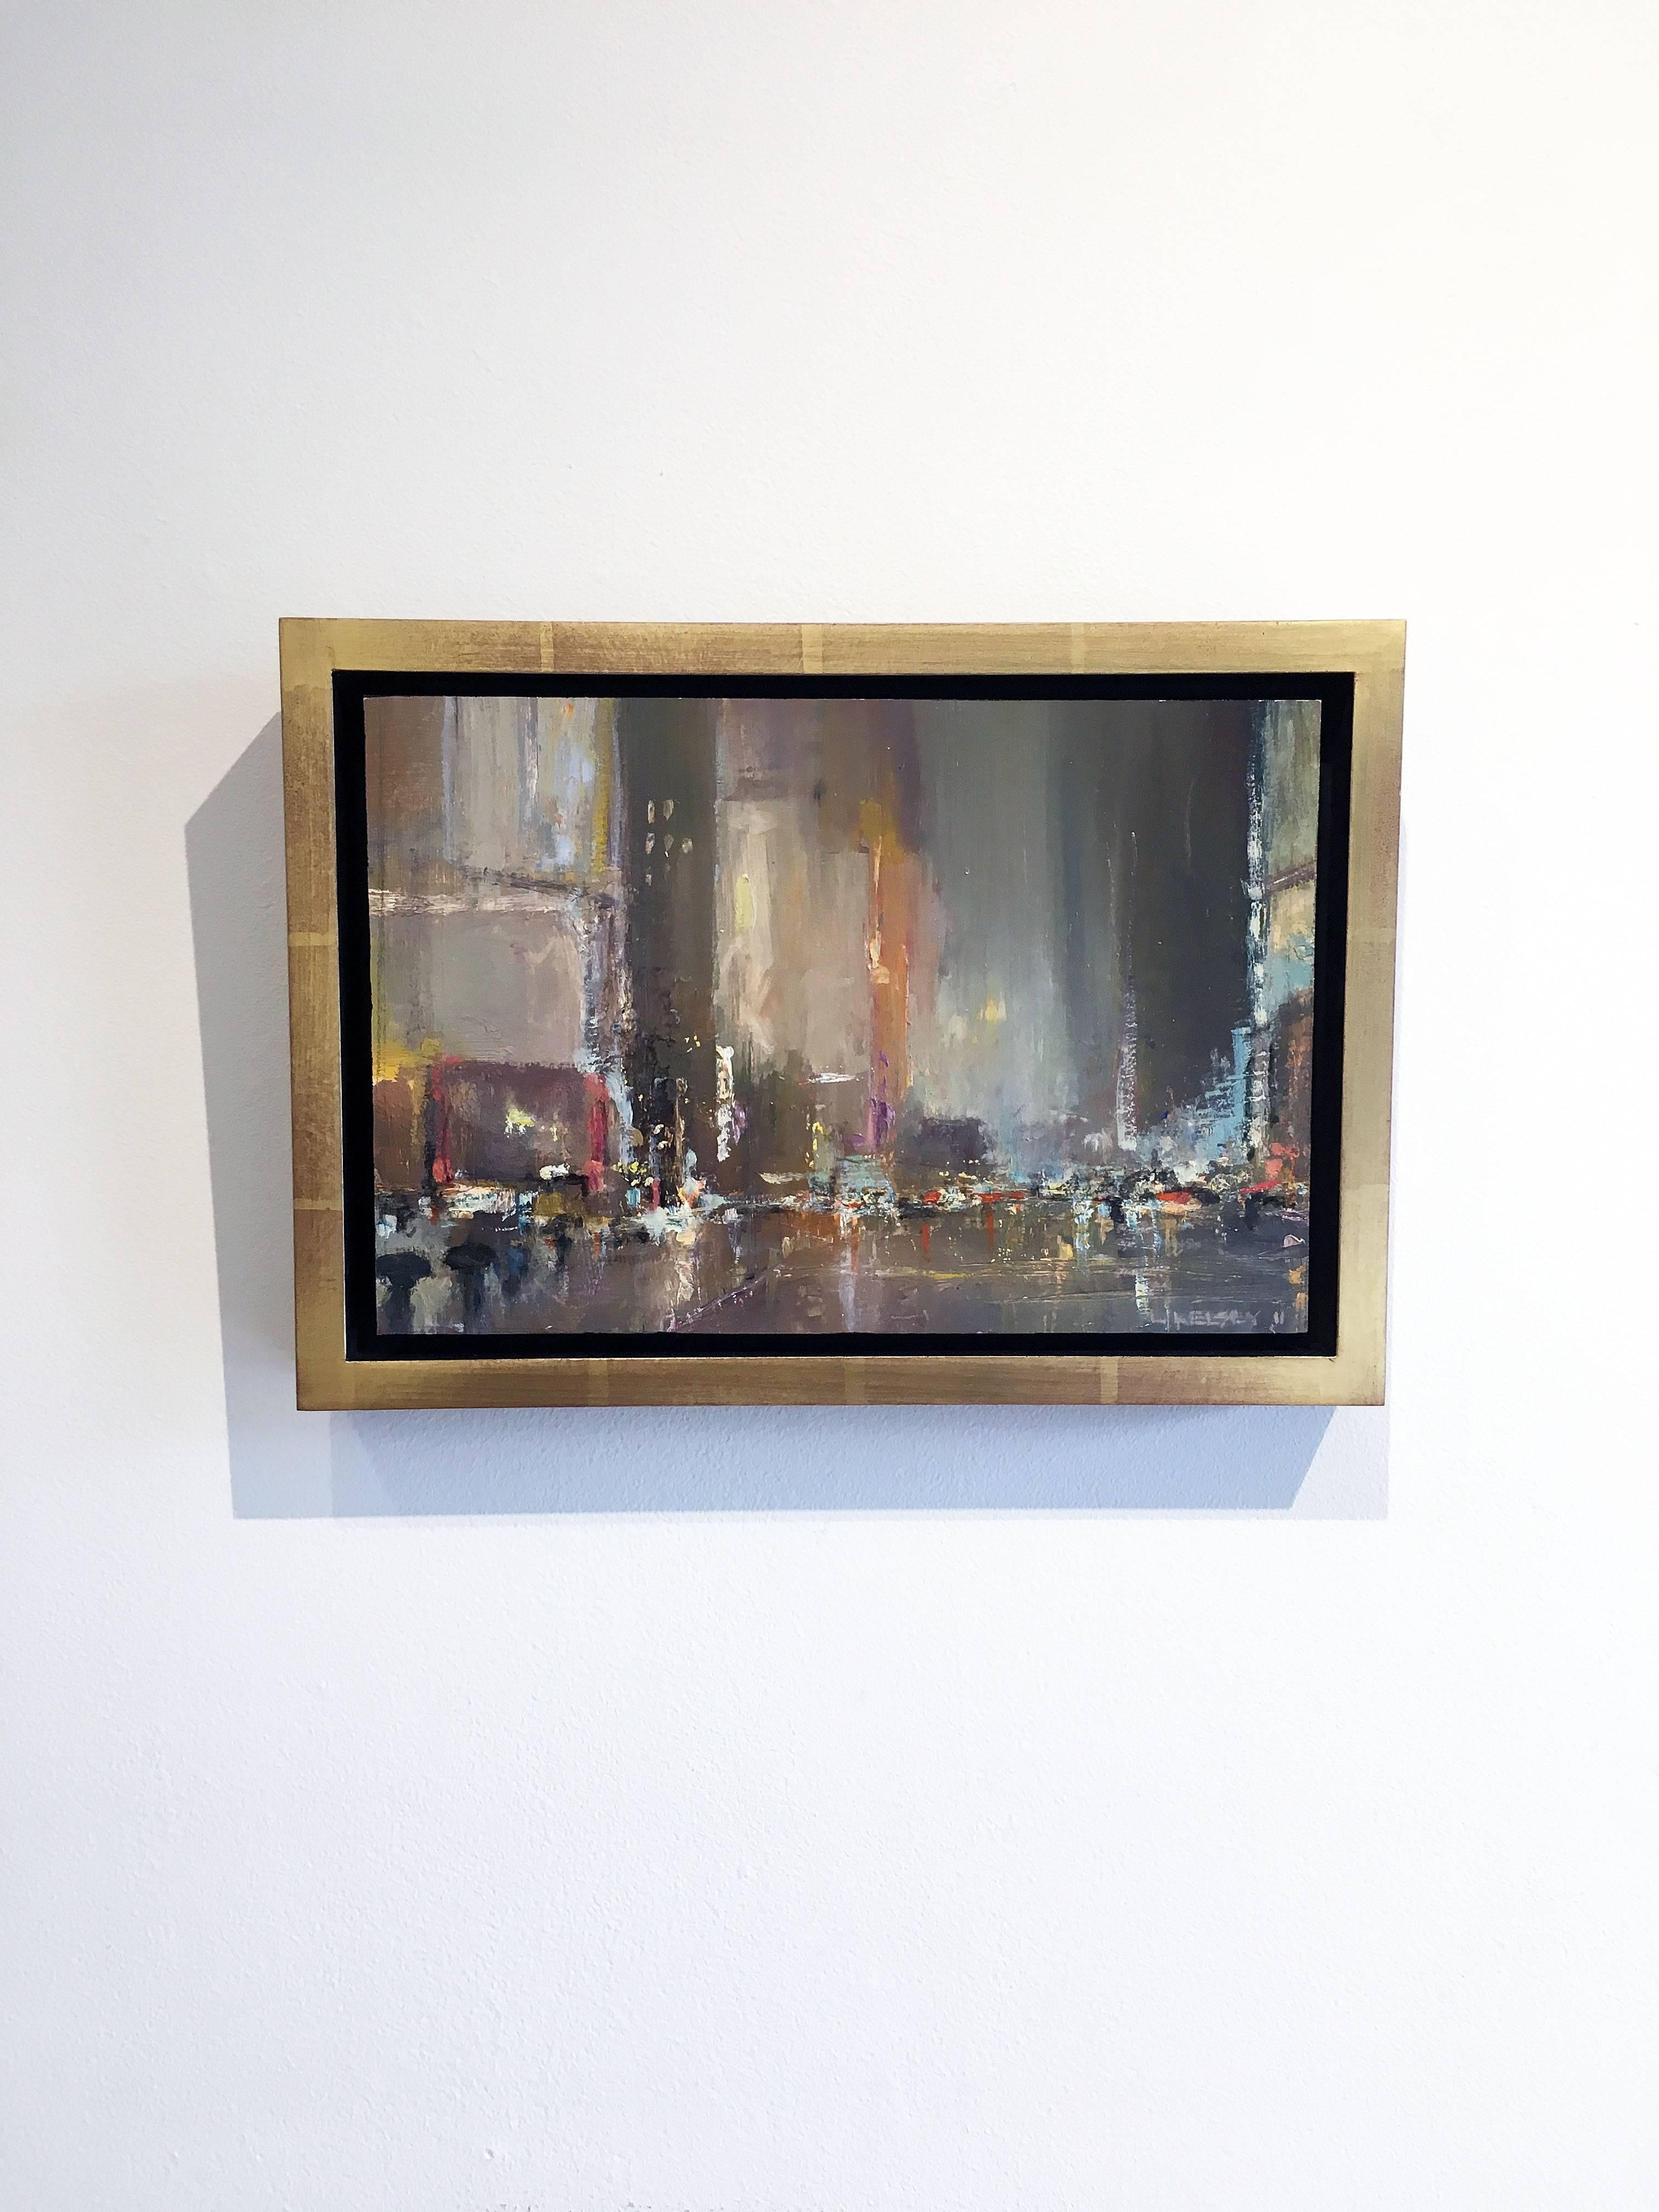 Broadway Lights, New York City Night - Painting by Lawrence Kelsey